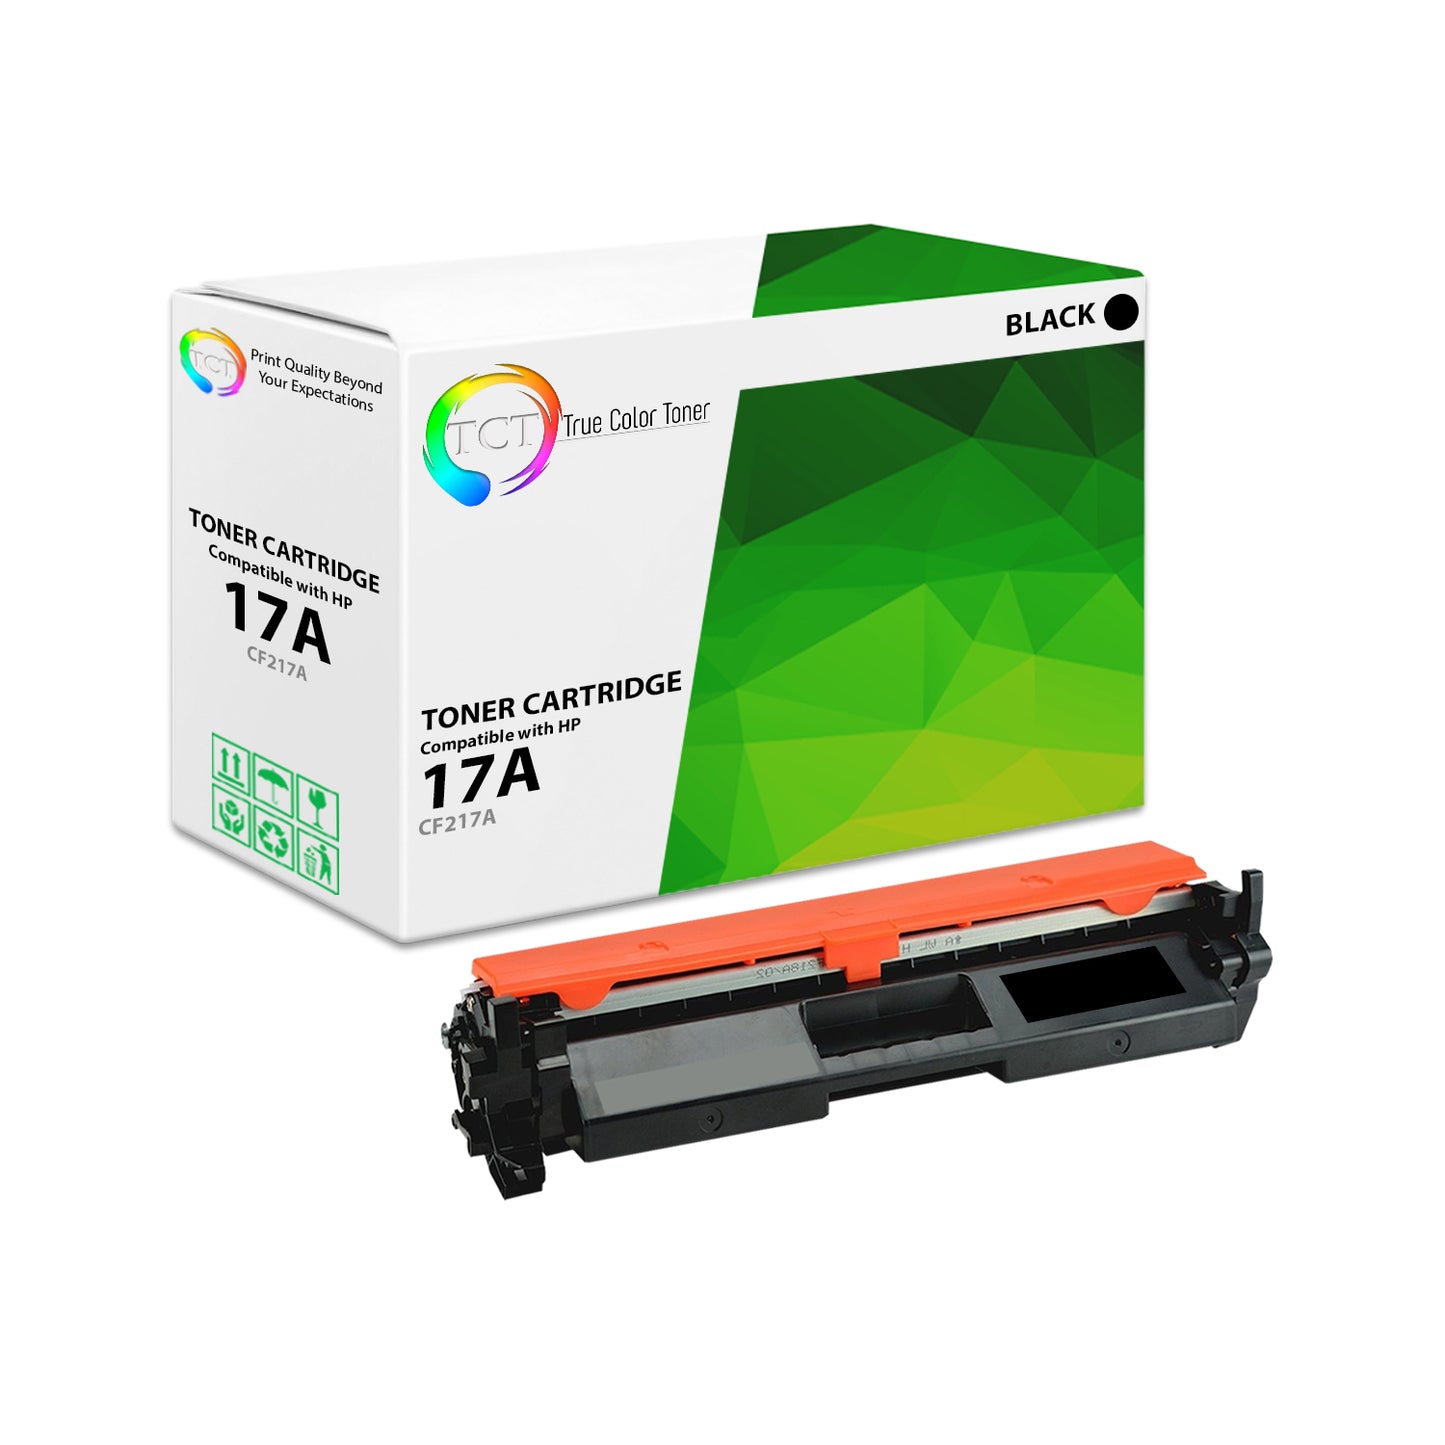 TCT Compatible Toner Cartridge Replacement for the HP 17A Series - 1 Pack Black